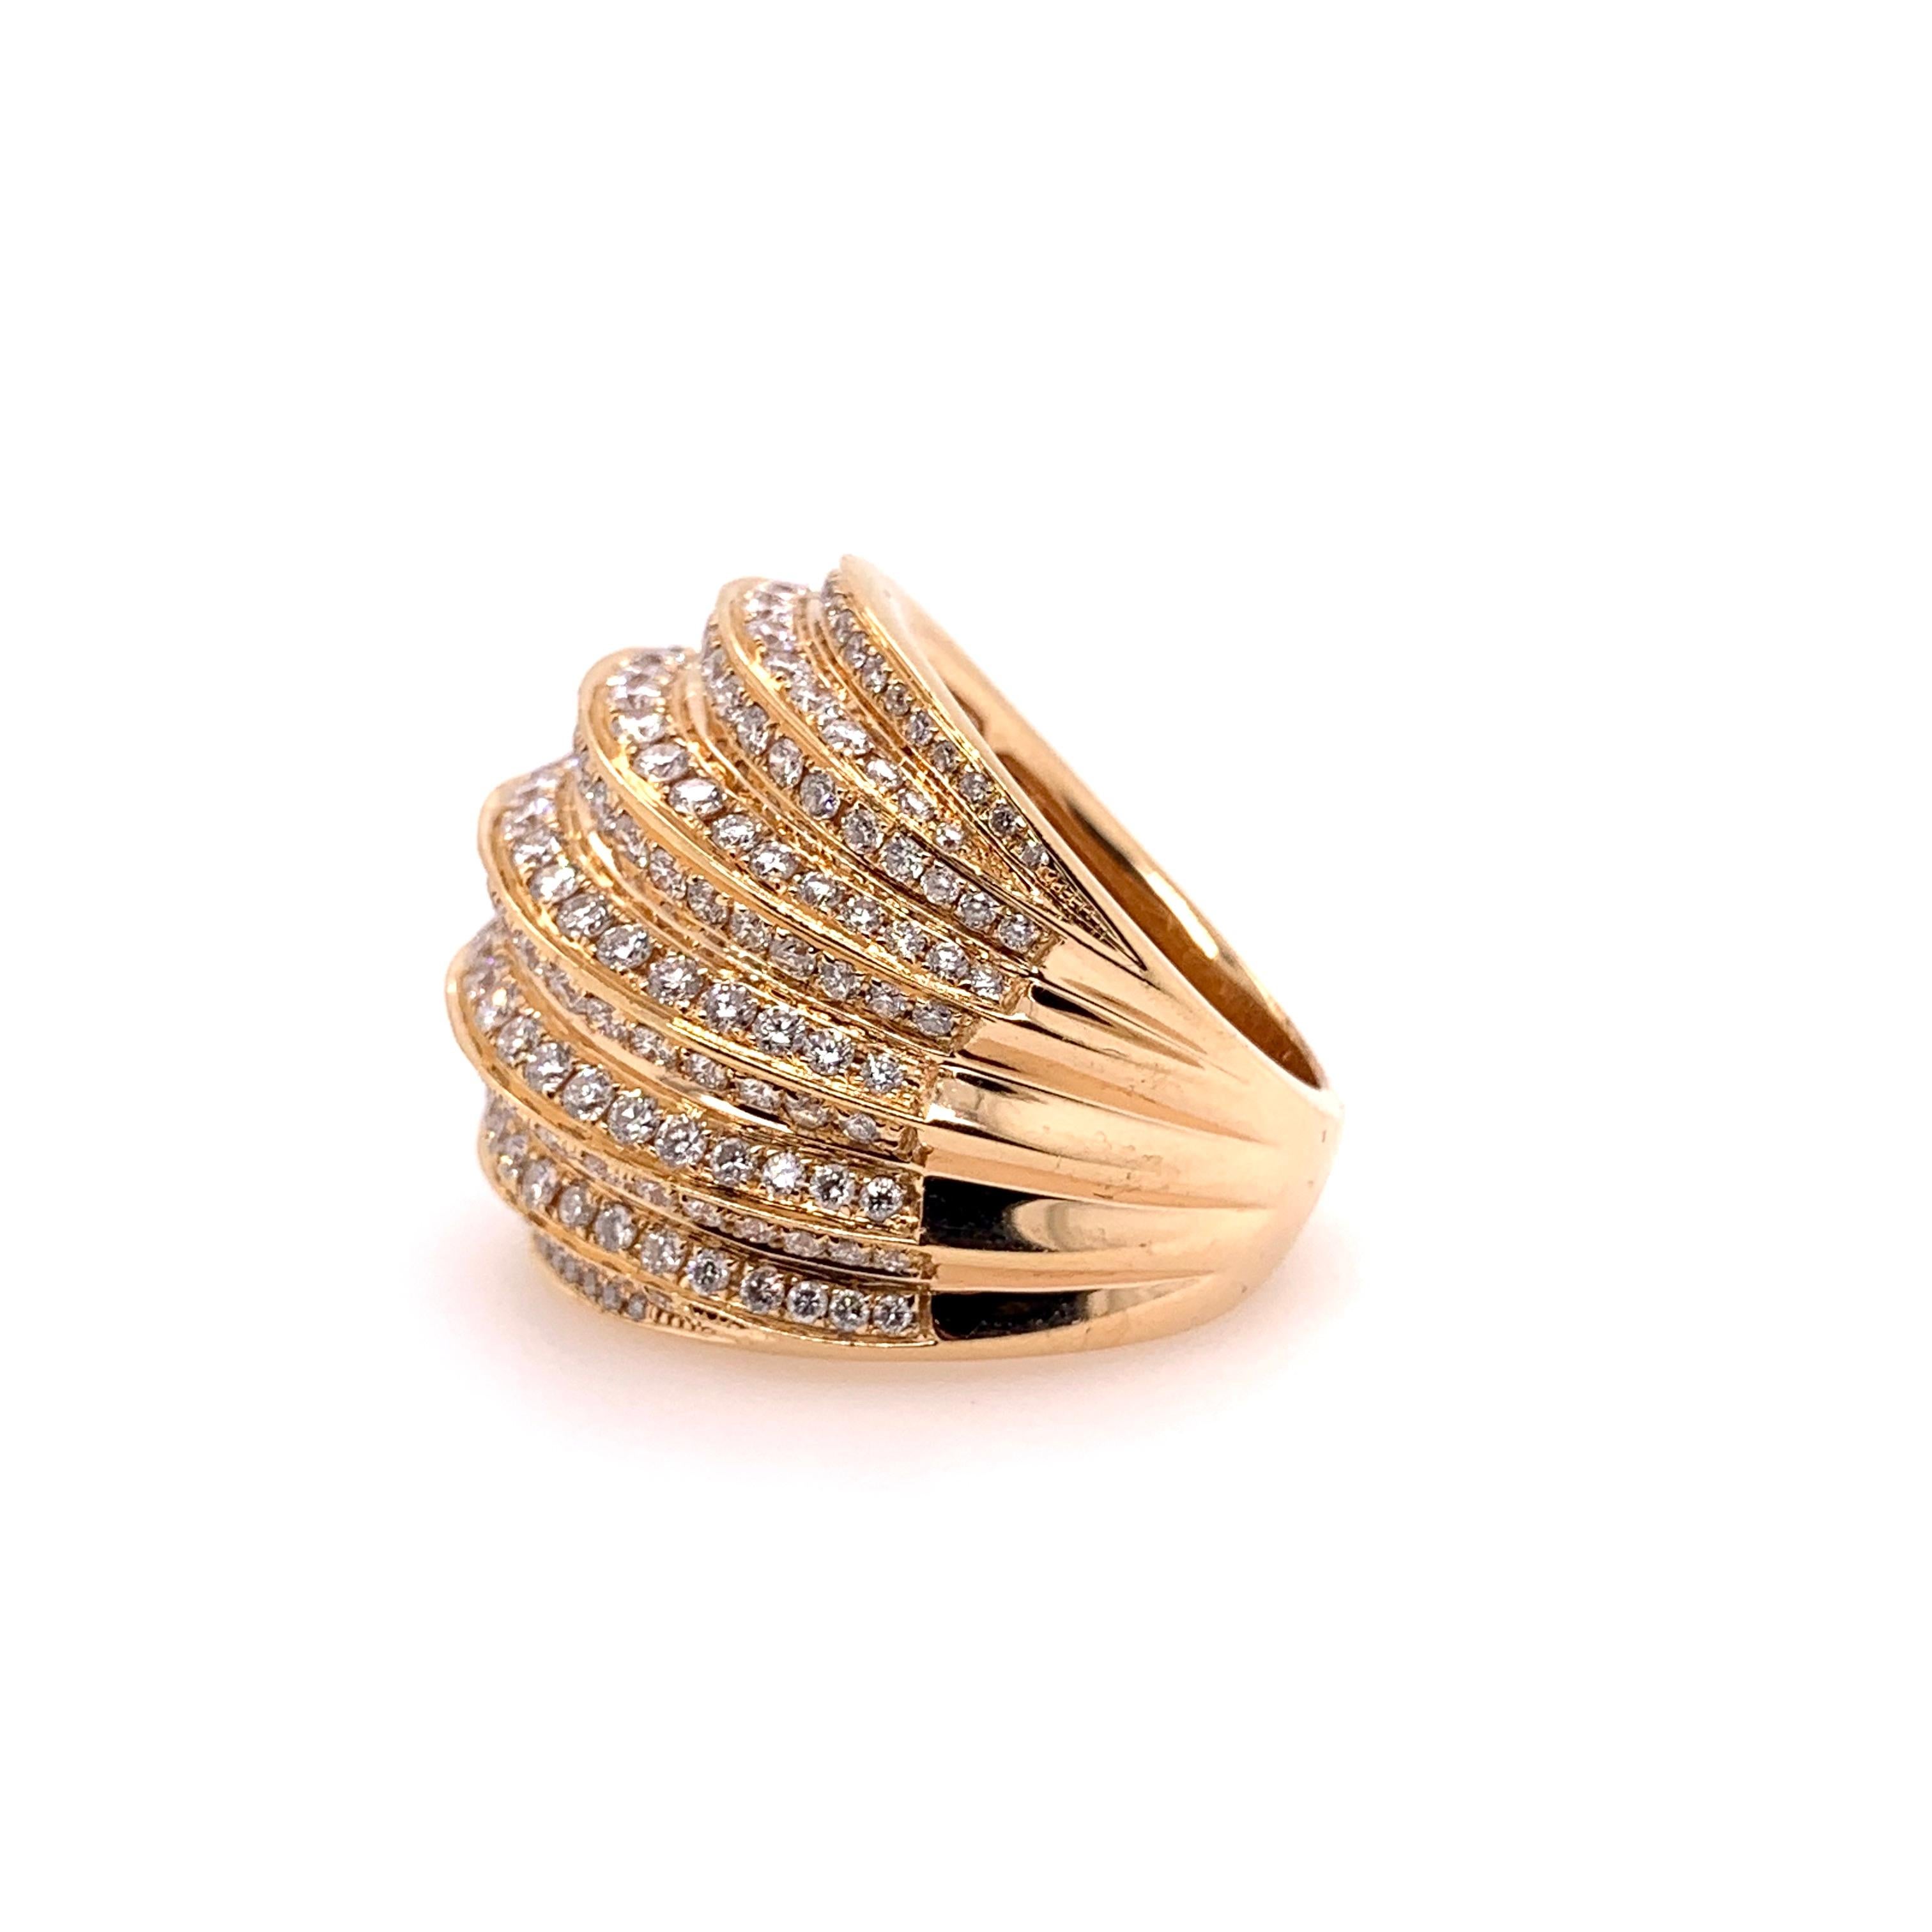 This gorgeous 18k rose gold ring was inspired from the concave shaped shells and waves of the ocean.  With over 4.24 cts of round brilliant diamonds, this masterpiece will be the wearable art for your finger that will complement any attire in a